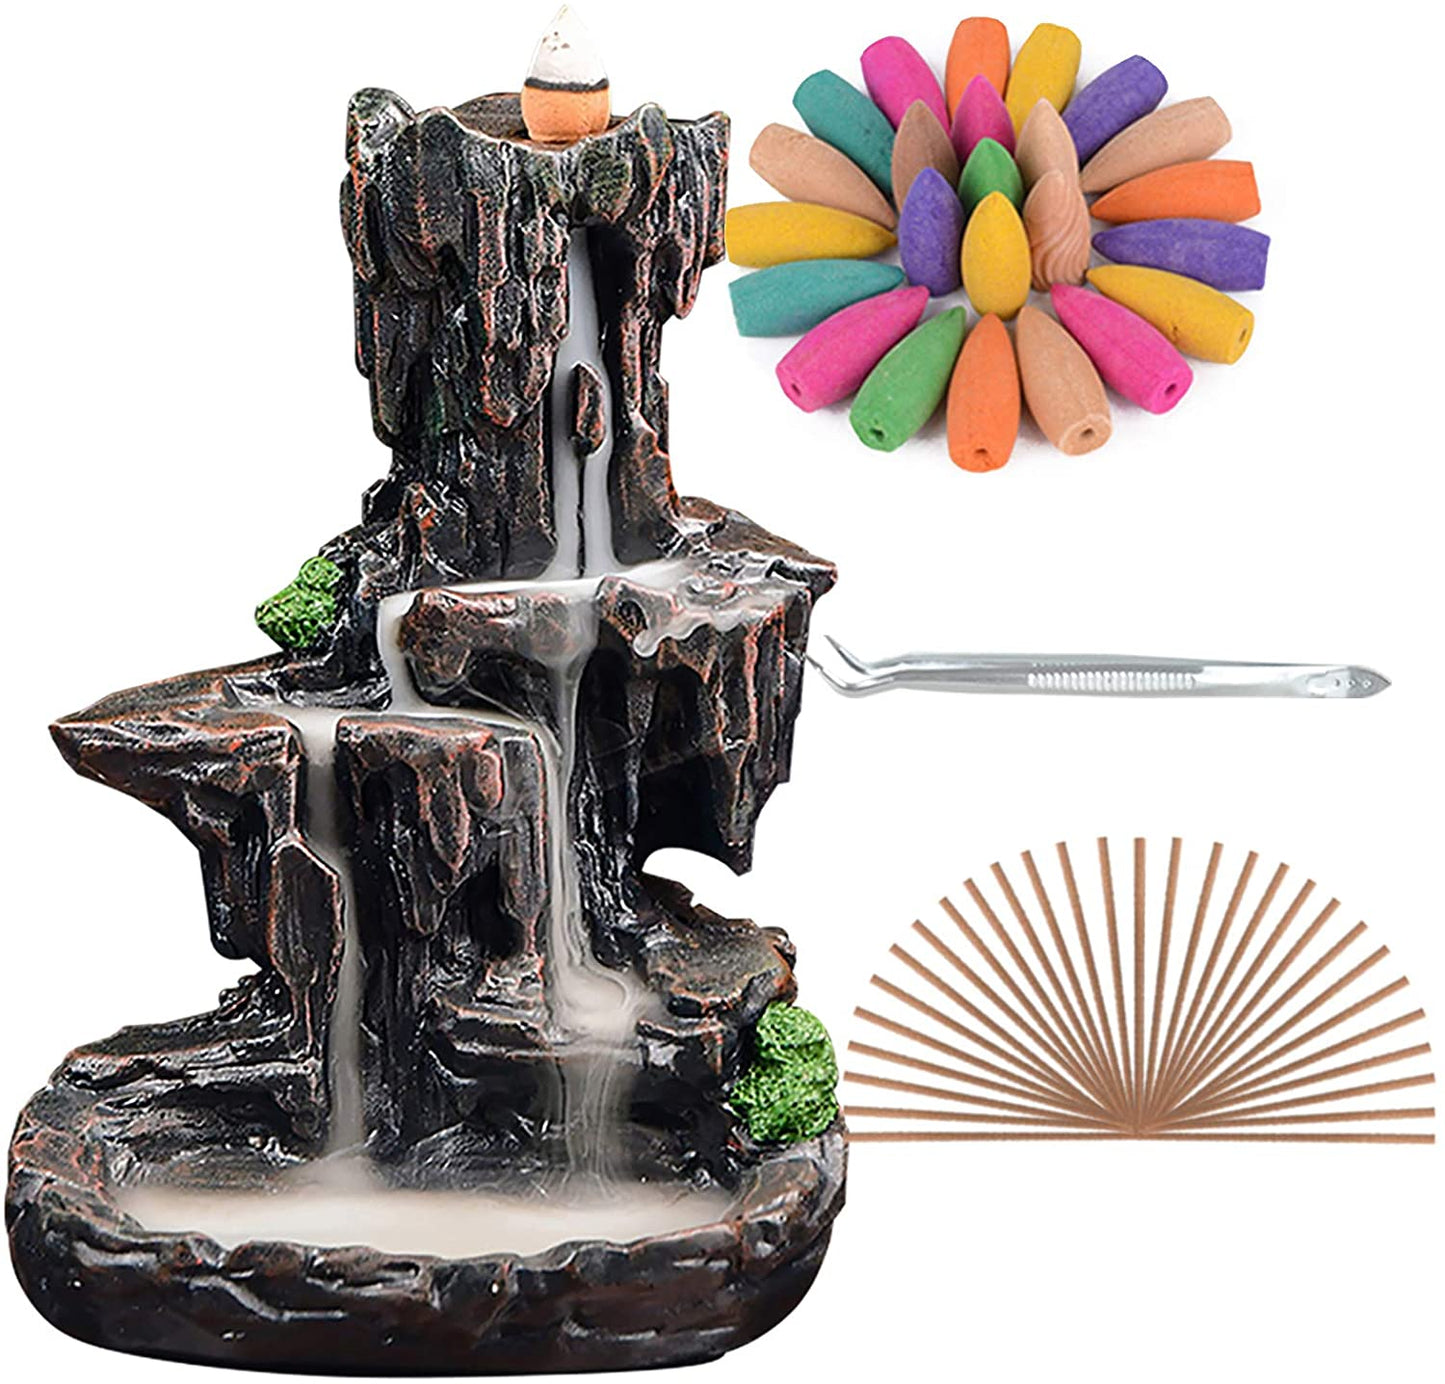 SPACEKEEPER Waterfall Backflow Incense Burner Incense Holders for Yoga Aromatcherapy Ornament with 120 Backflow Incense Cones + 30 Incense Stick